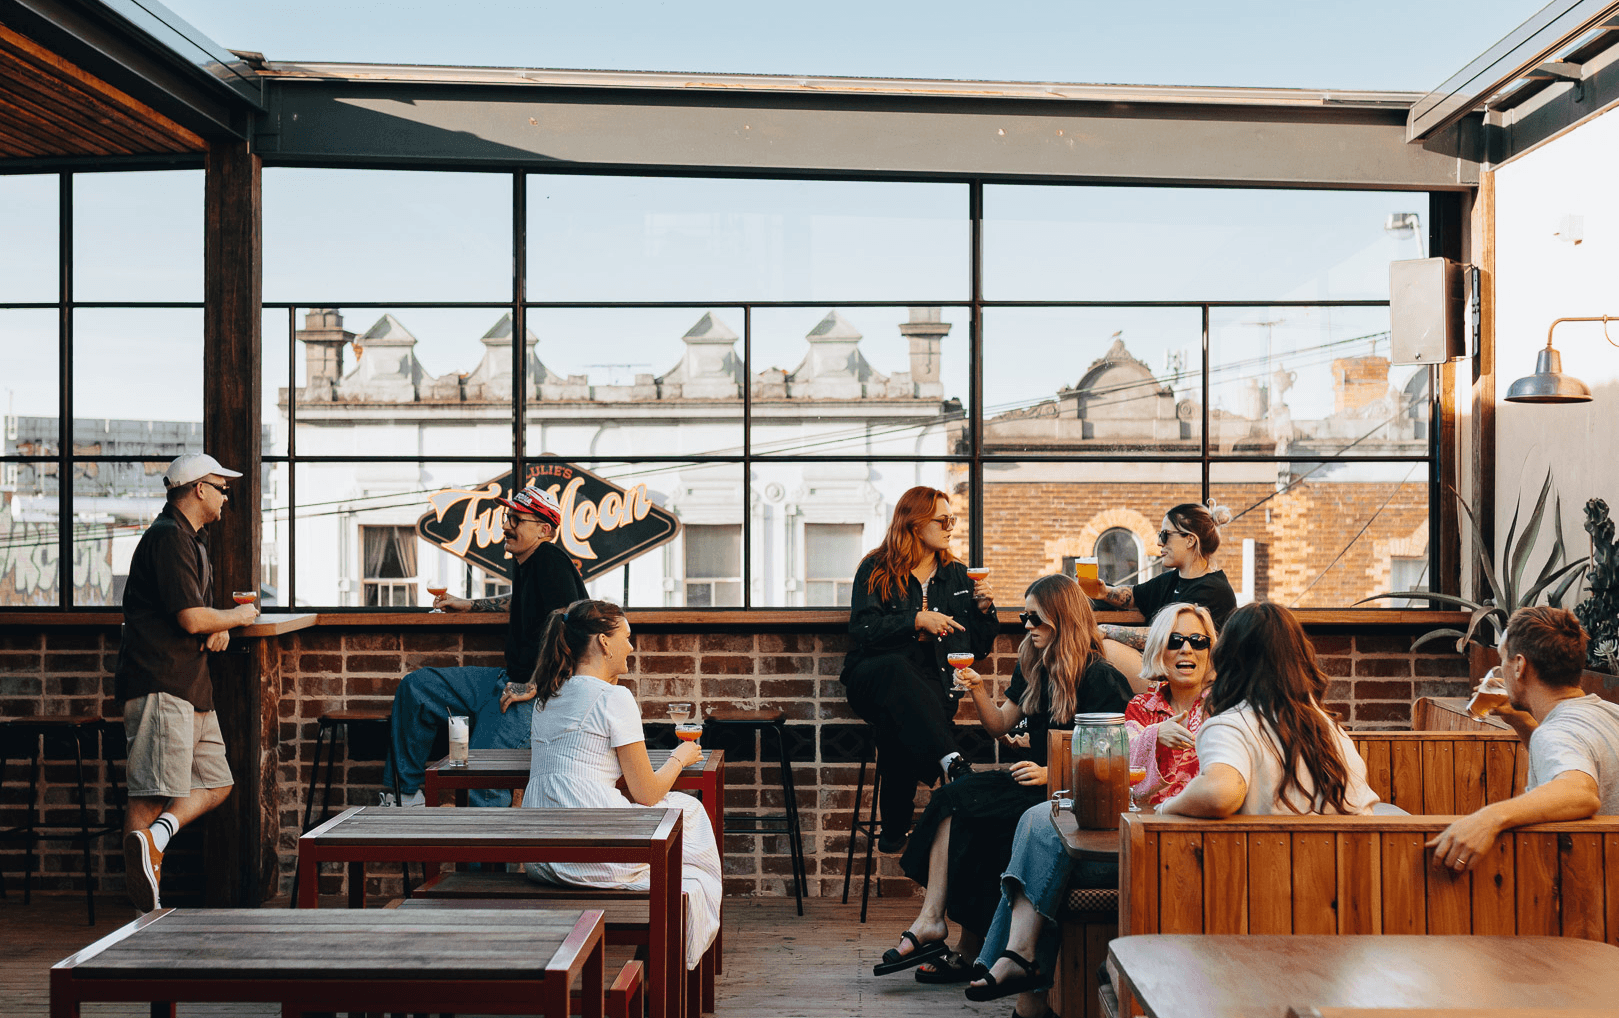 A rooftop packed with people that also serves one of the best burgers Melbourne has to offer